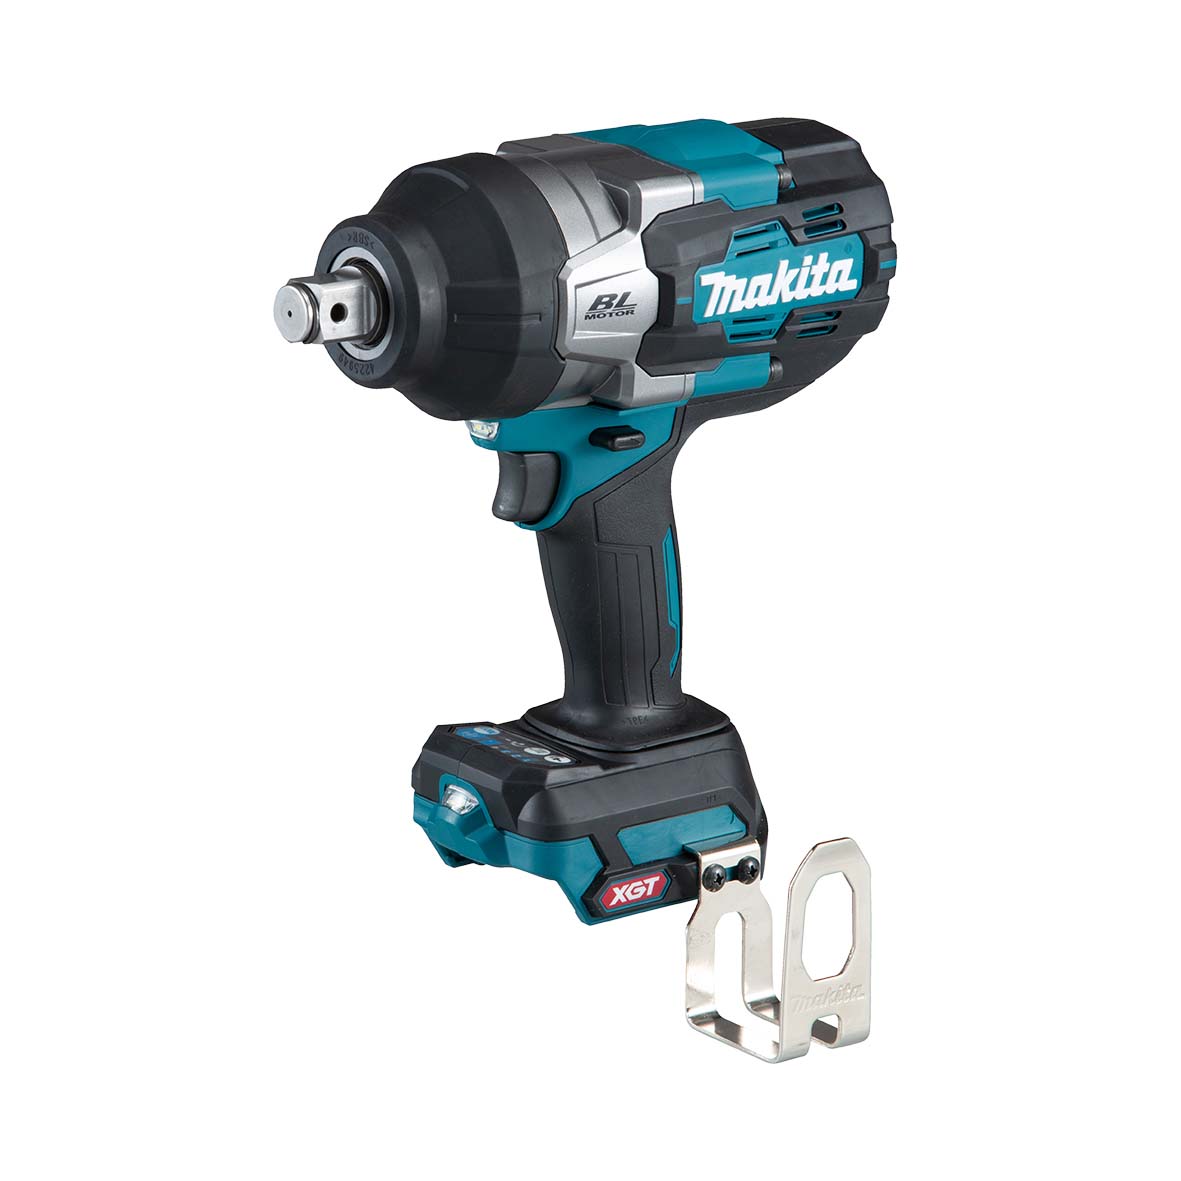 40V 3/4" Brushless Impact Wrench Bare (Tool Only) TW001GZ by Makita